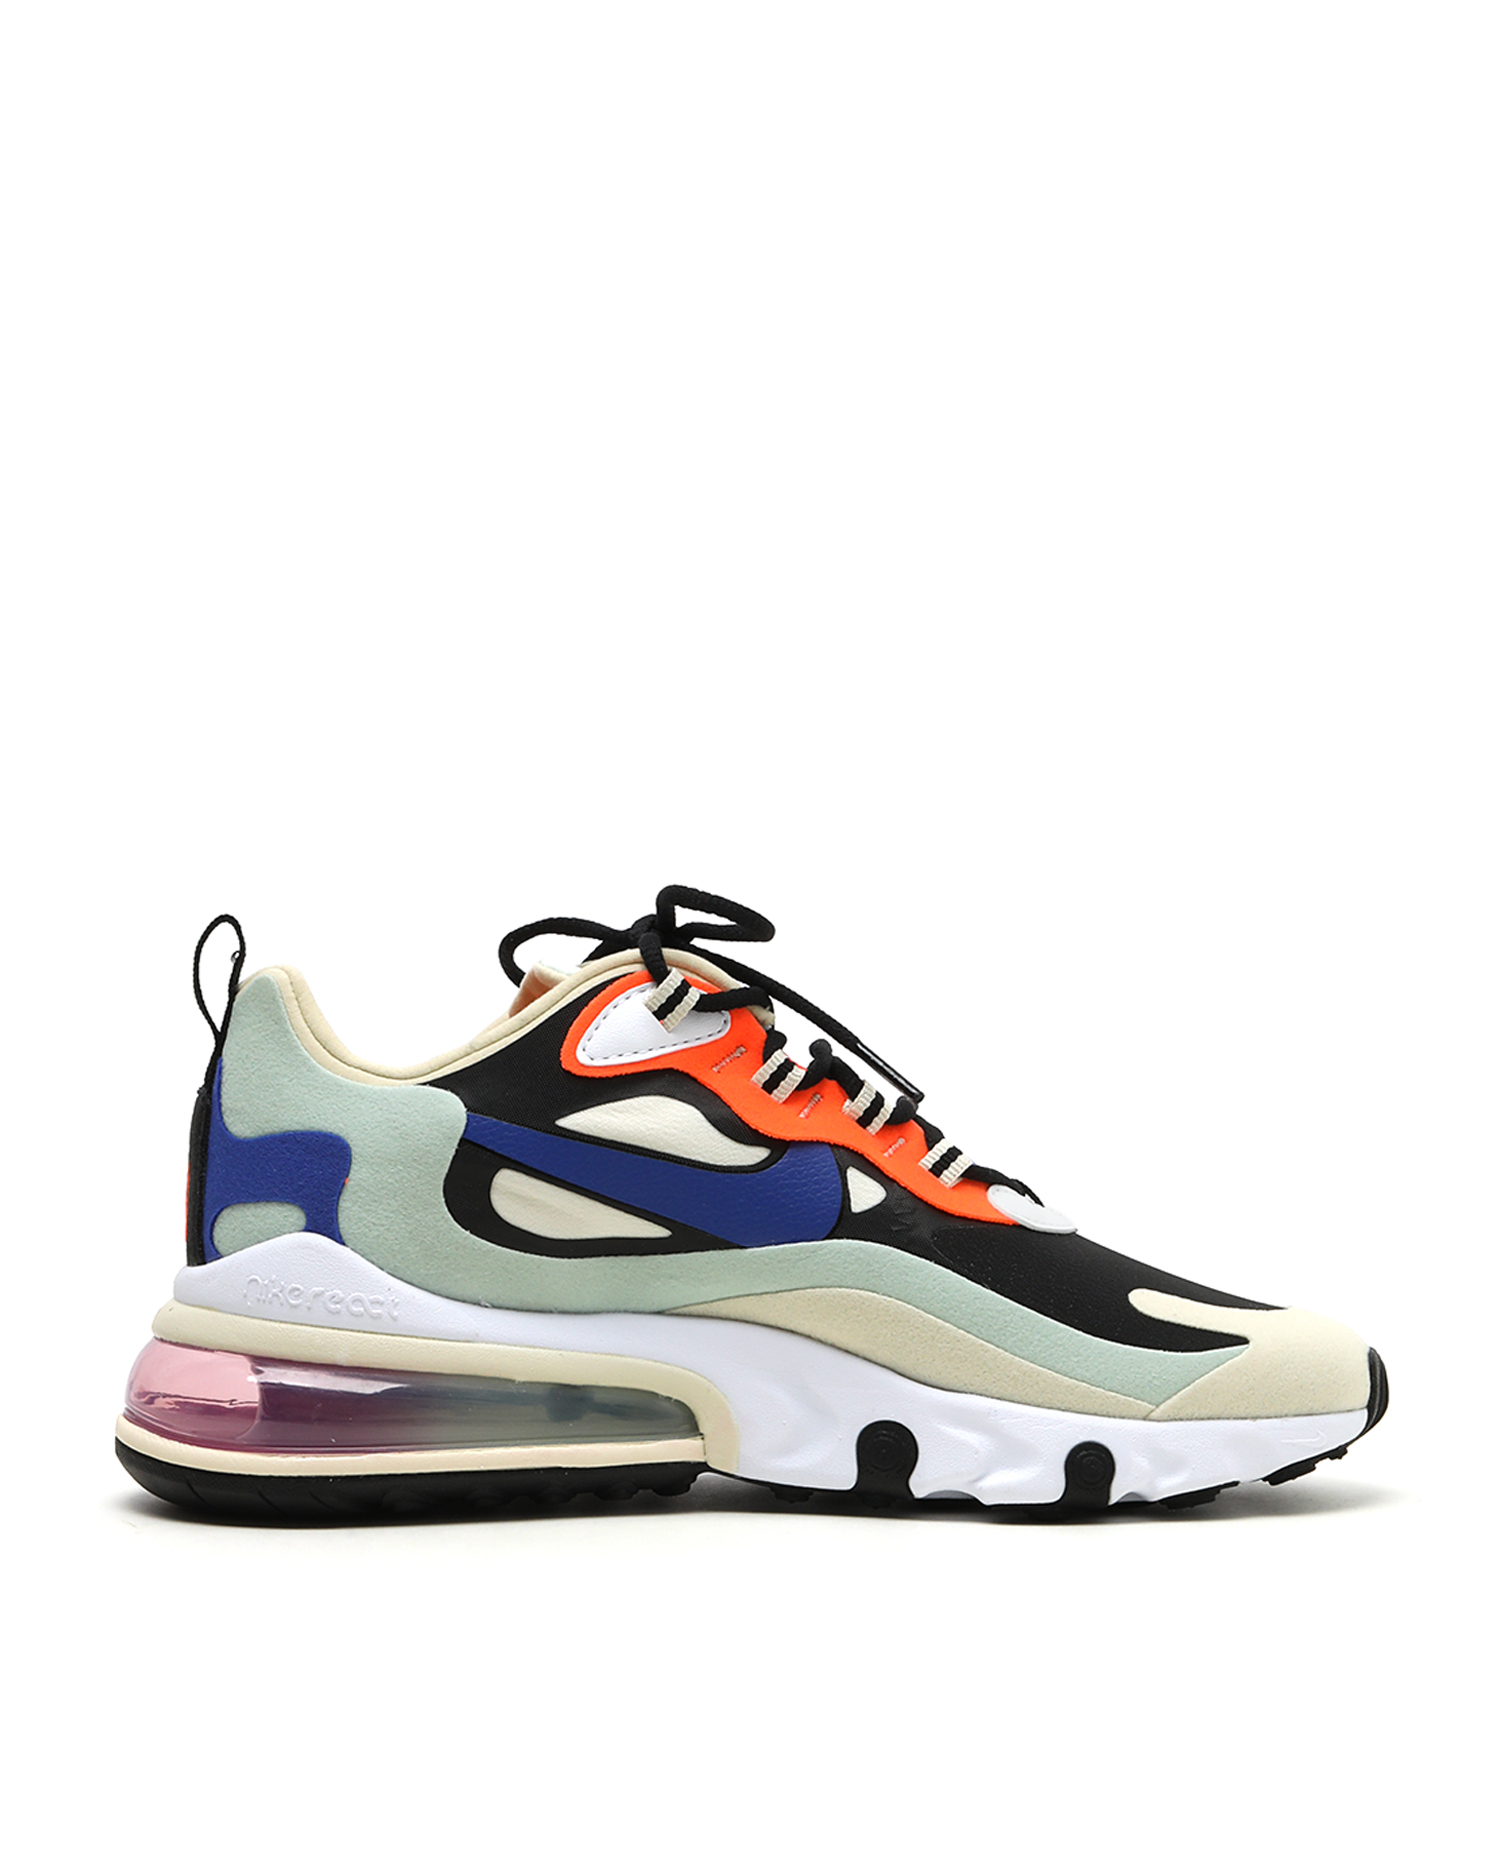 when did nike 270 react come out